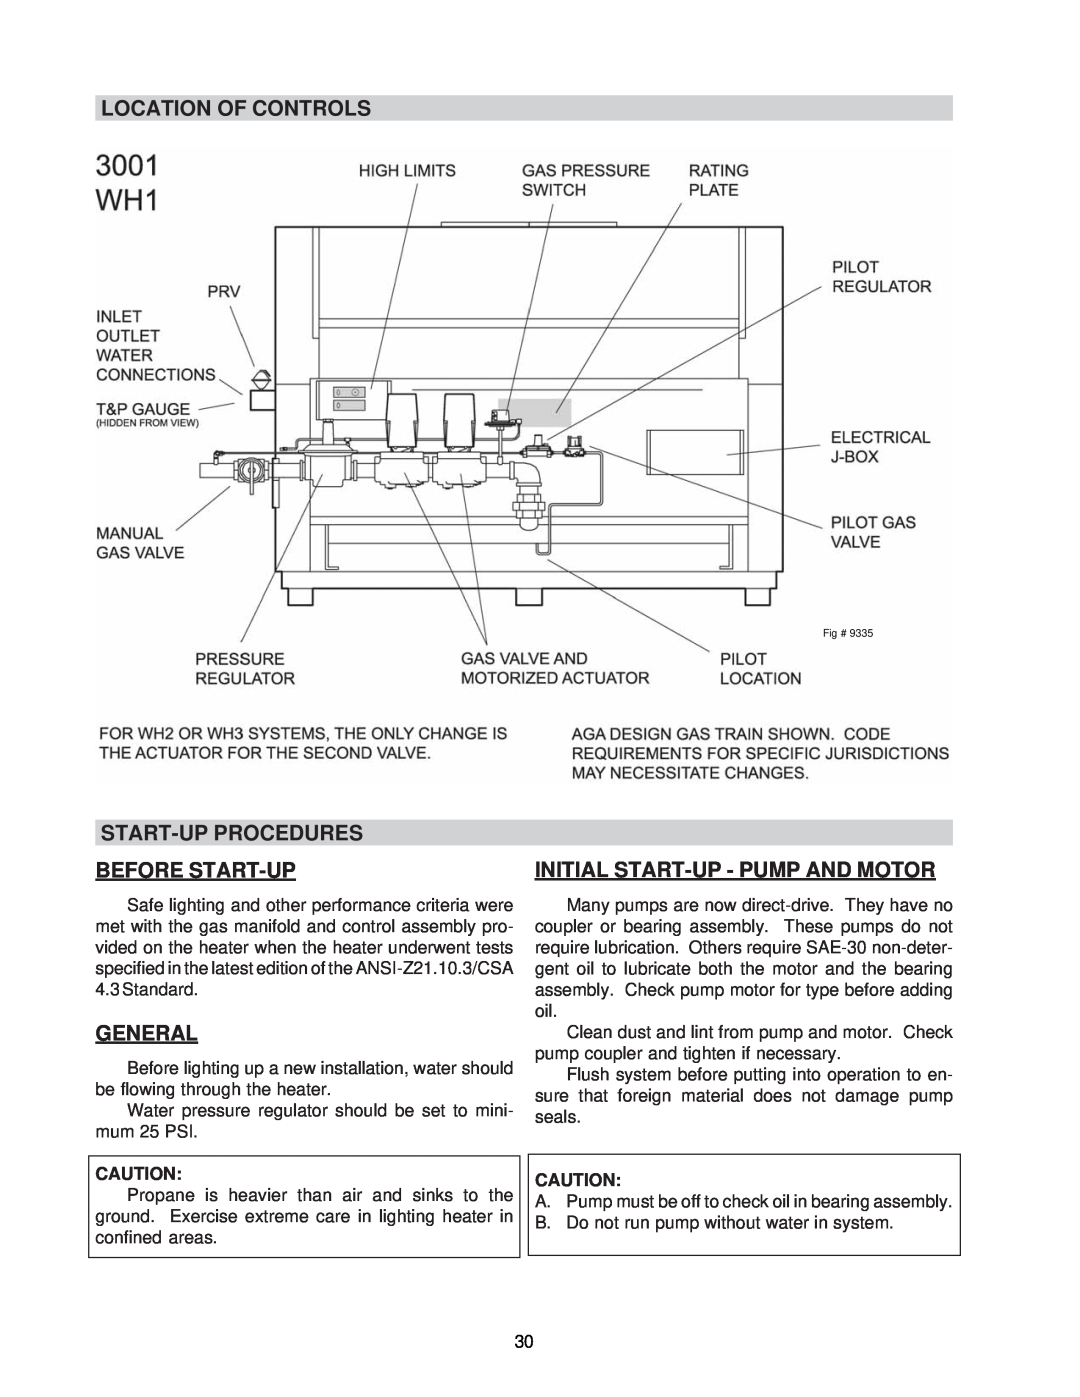 Raypak 0133-4001 manual Start-Upprocedures Before Start-Up, Initial Start-Up- Pump And Motor, Location Of Controls, General 